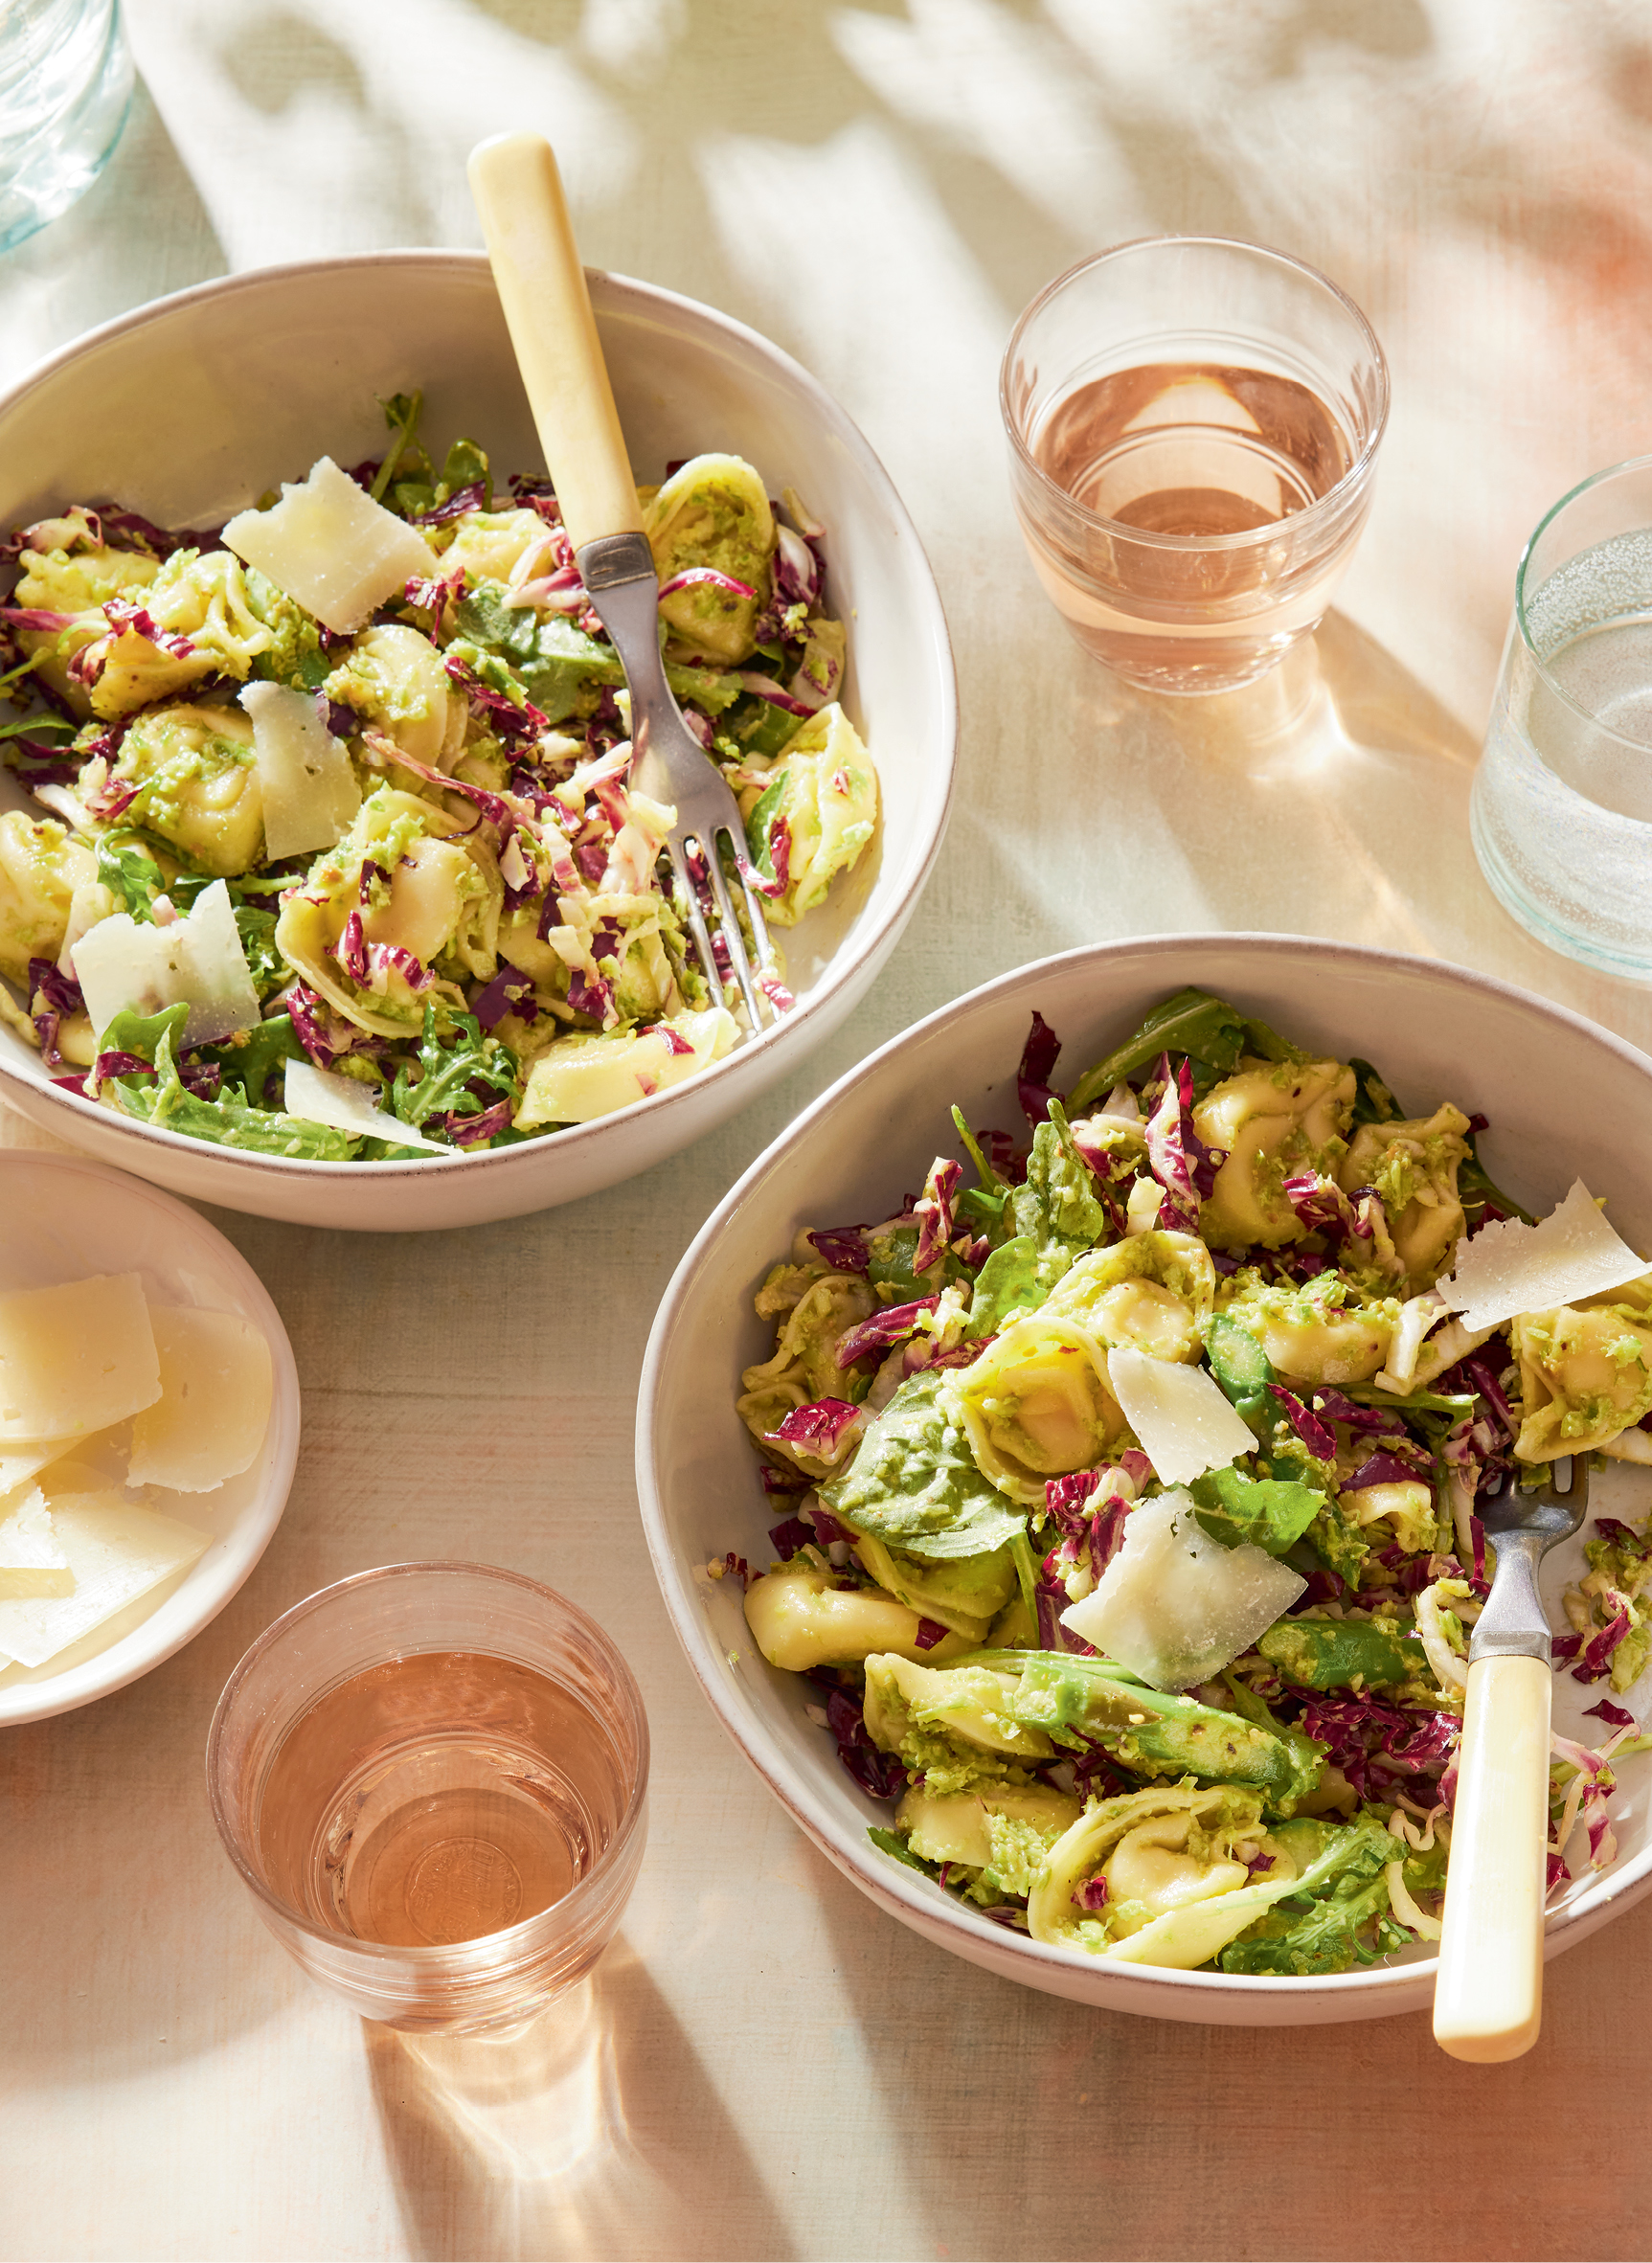 Two bowls of tortellini salad, set with glasses of rosé.